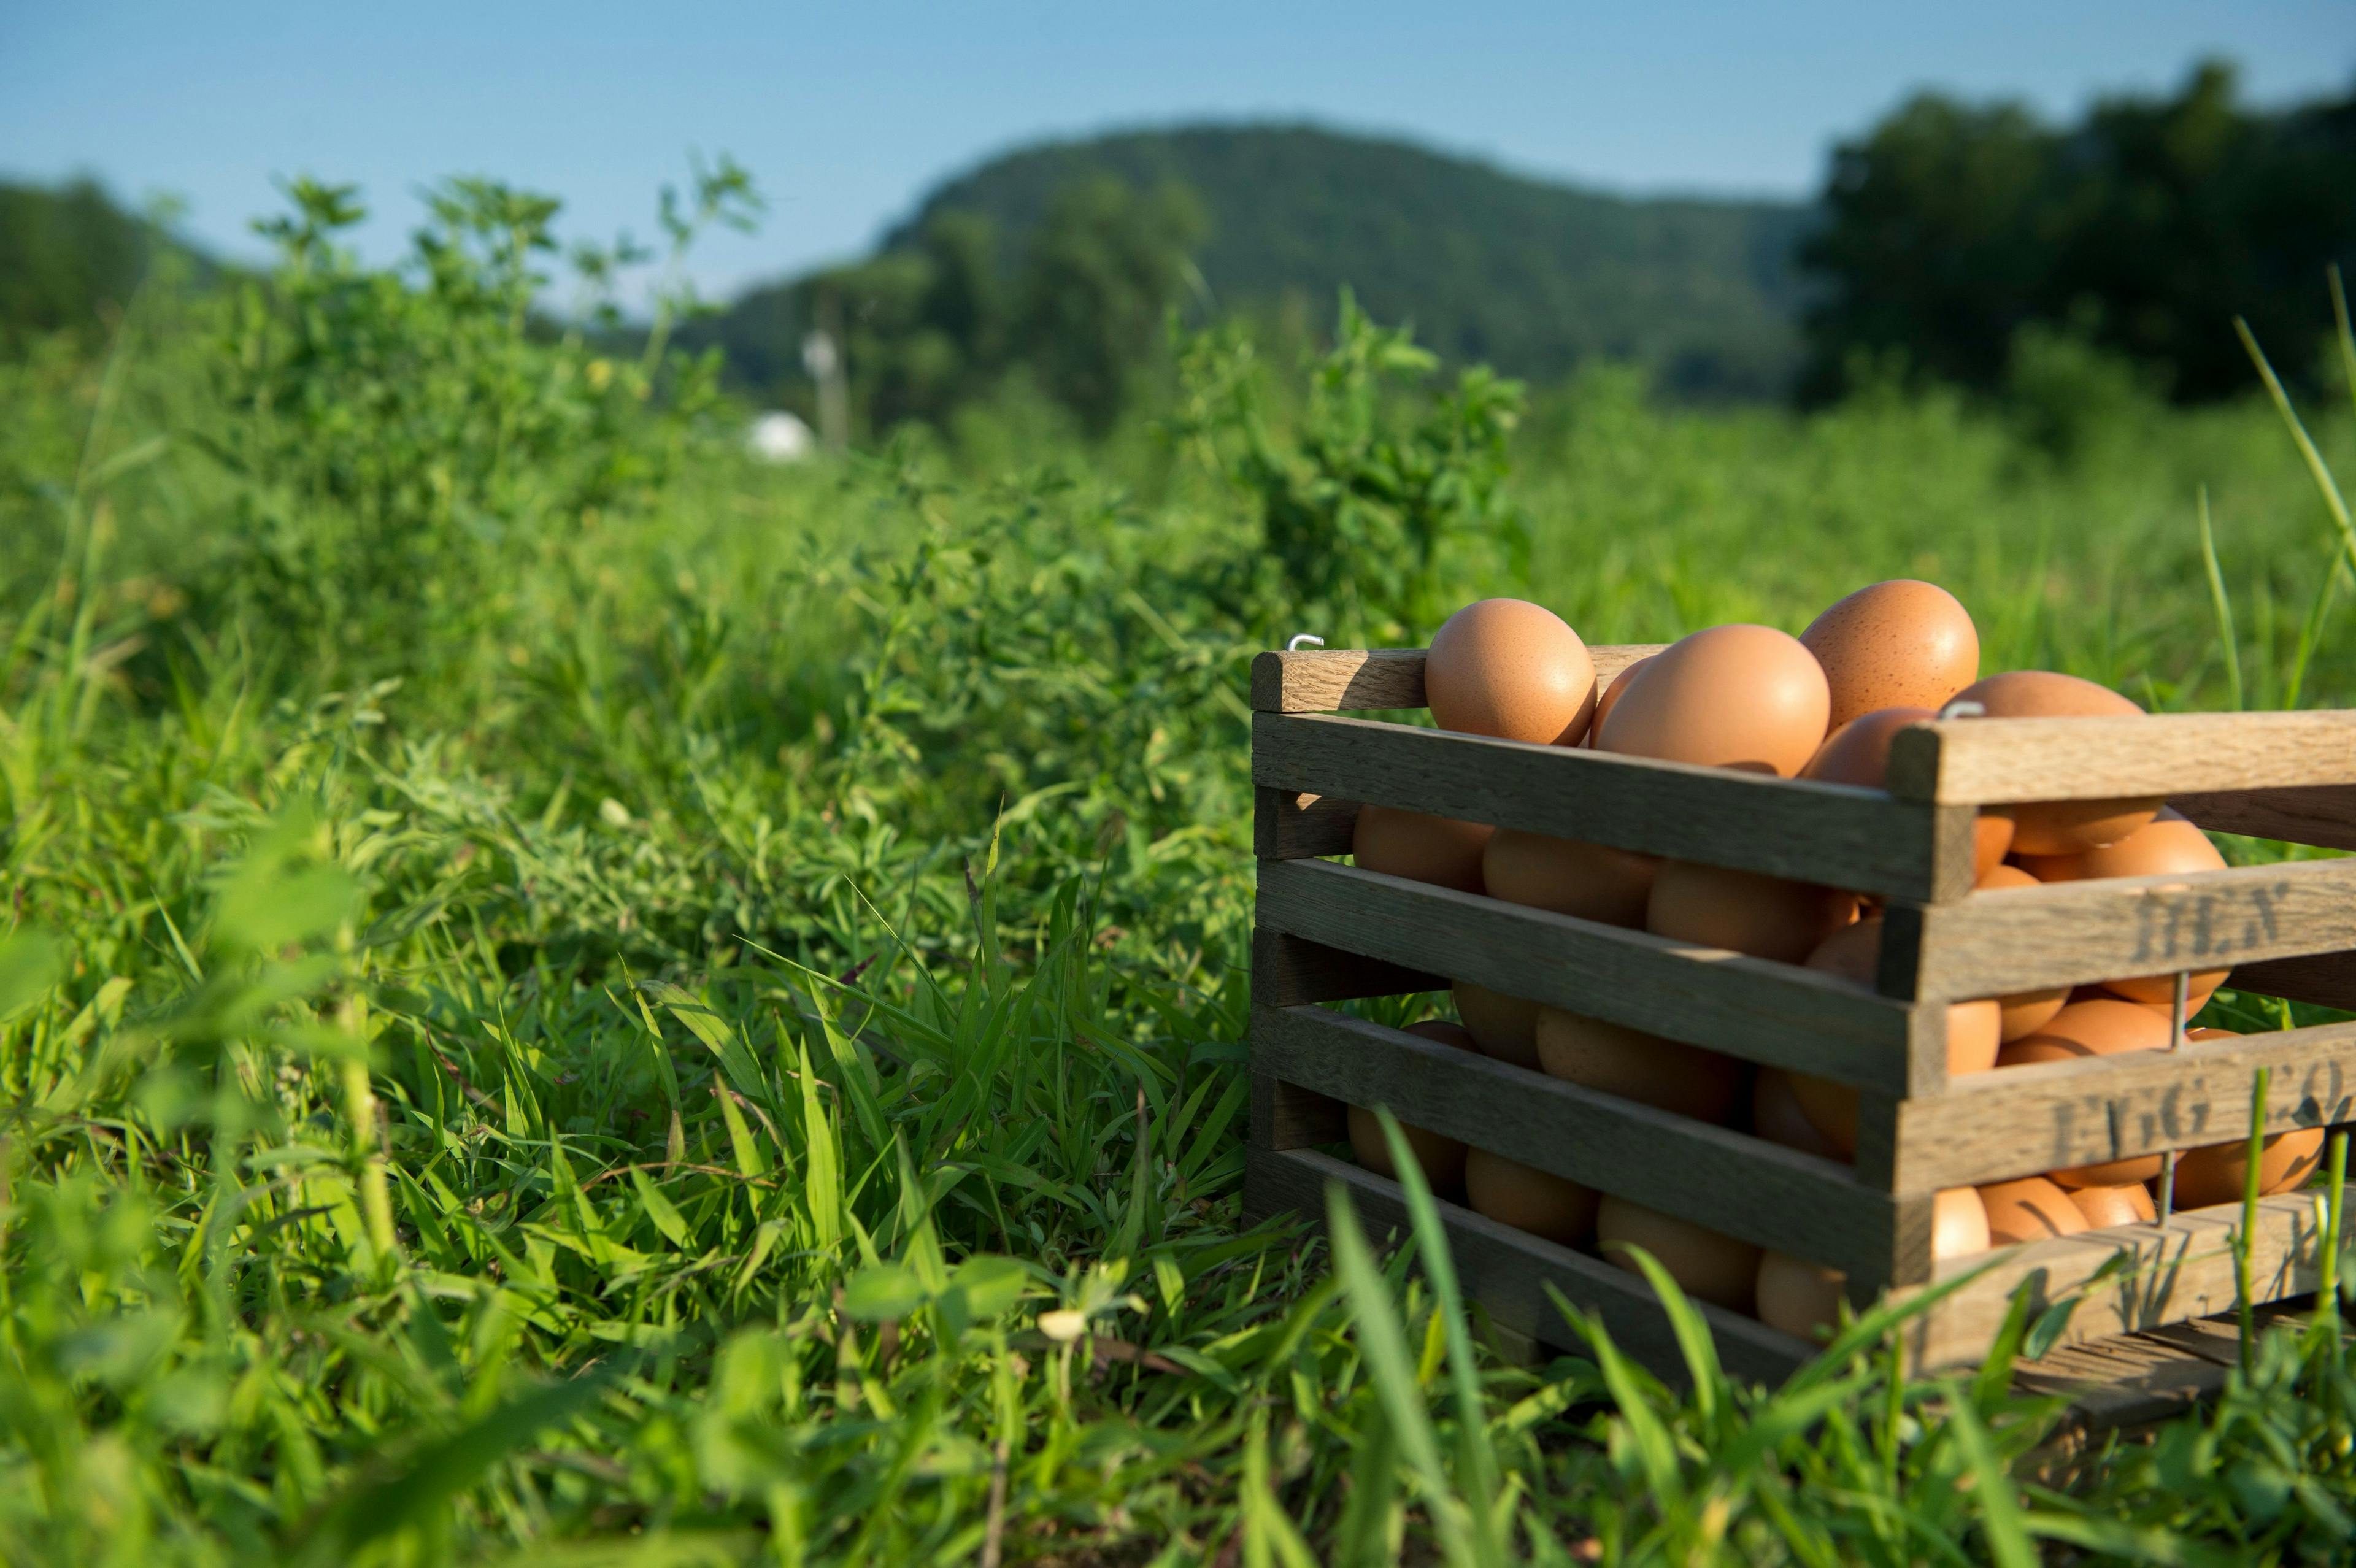 A wooden basket of organic eggs set on green grass at the Goede family farm in Wisconsin.